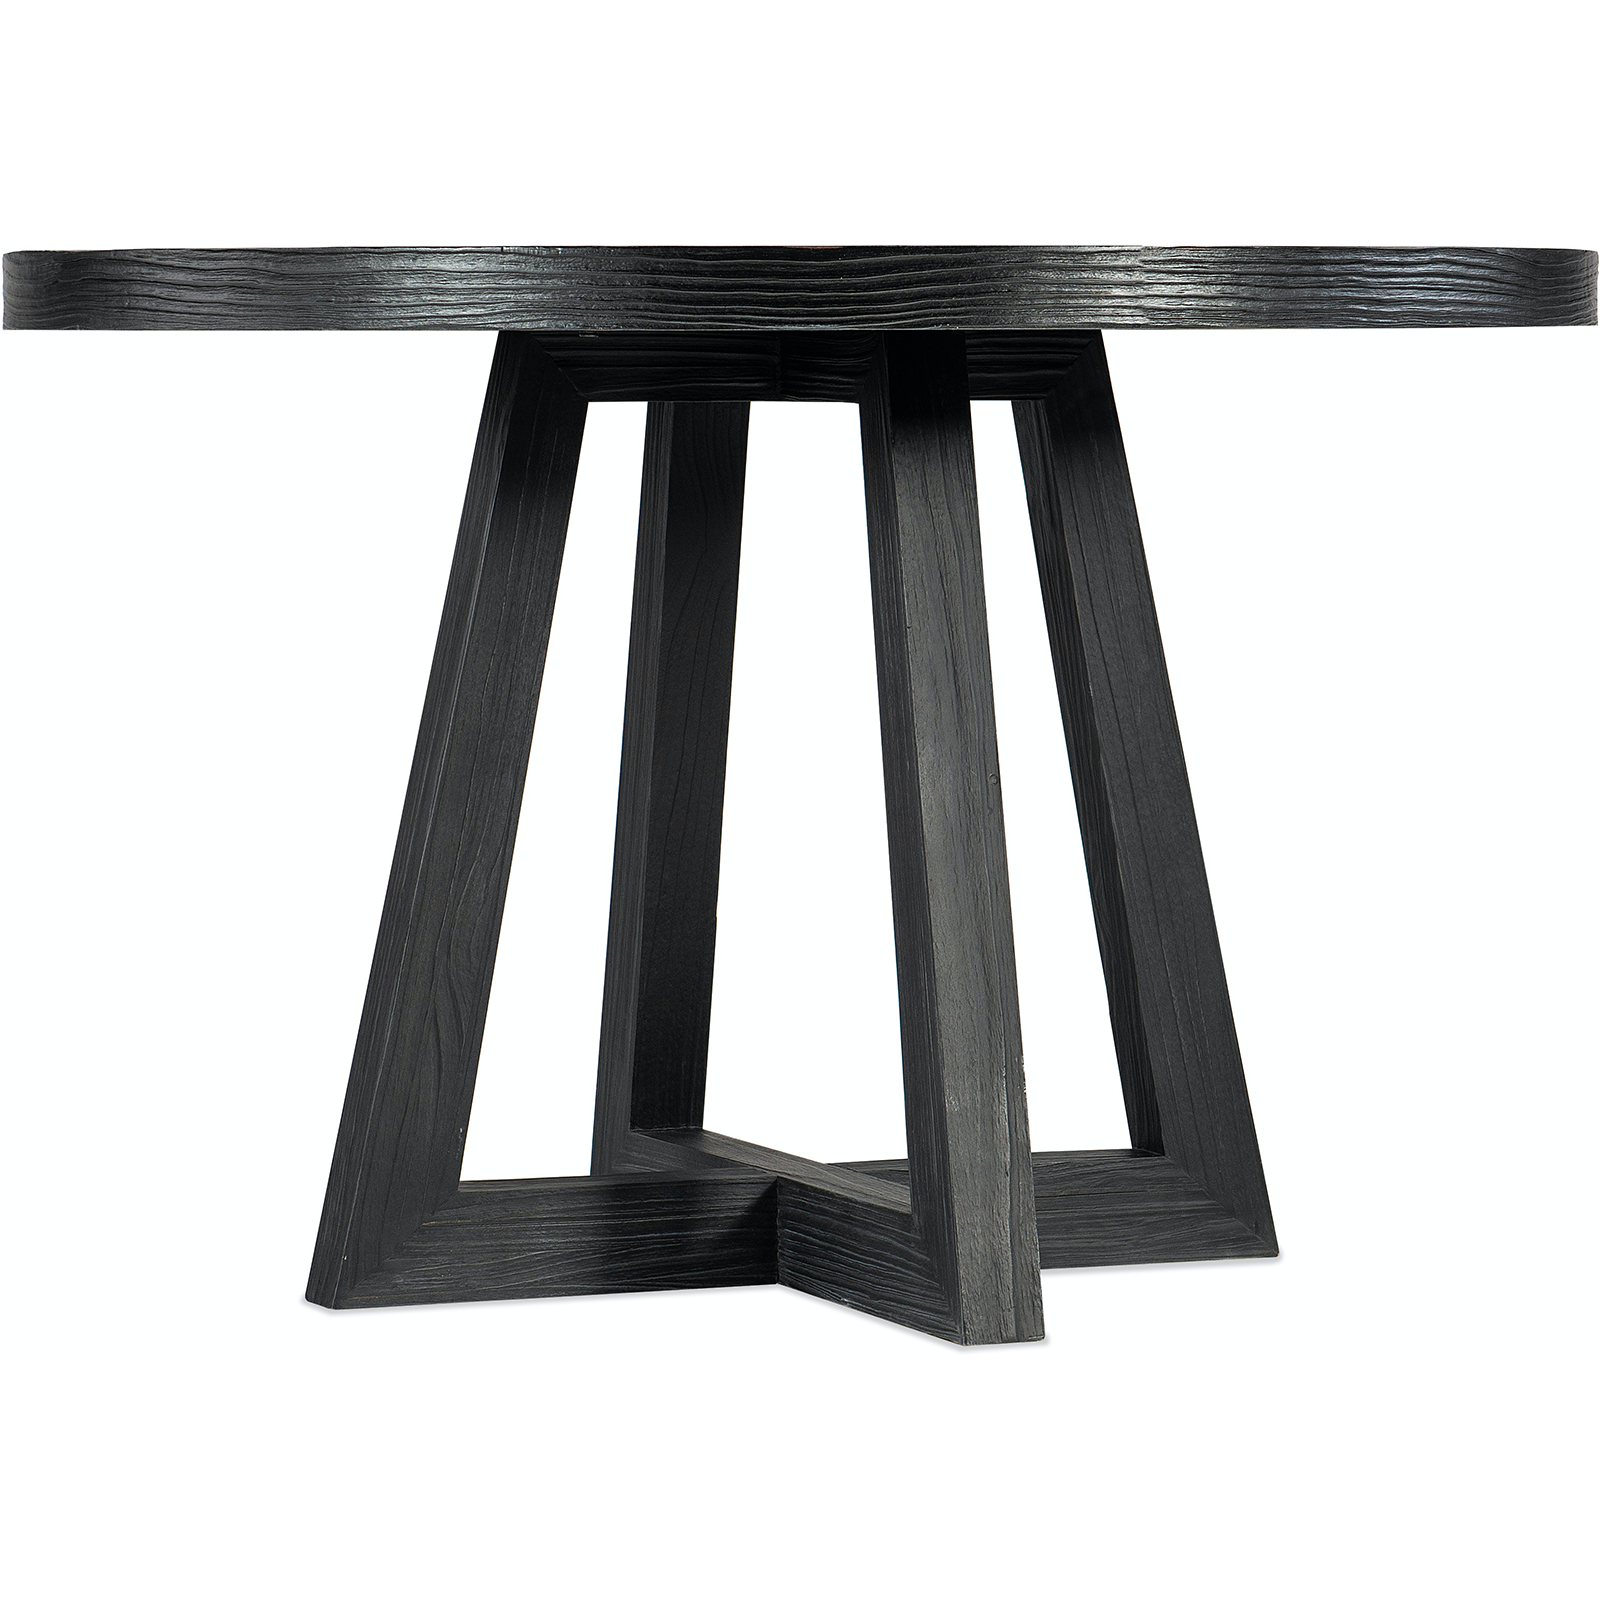 Burano 46" Dining Table